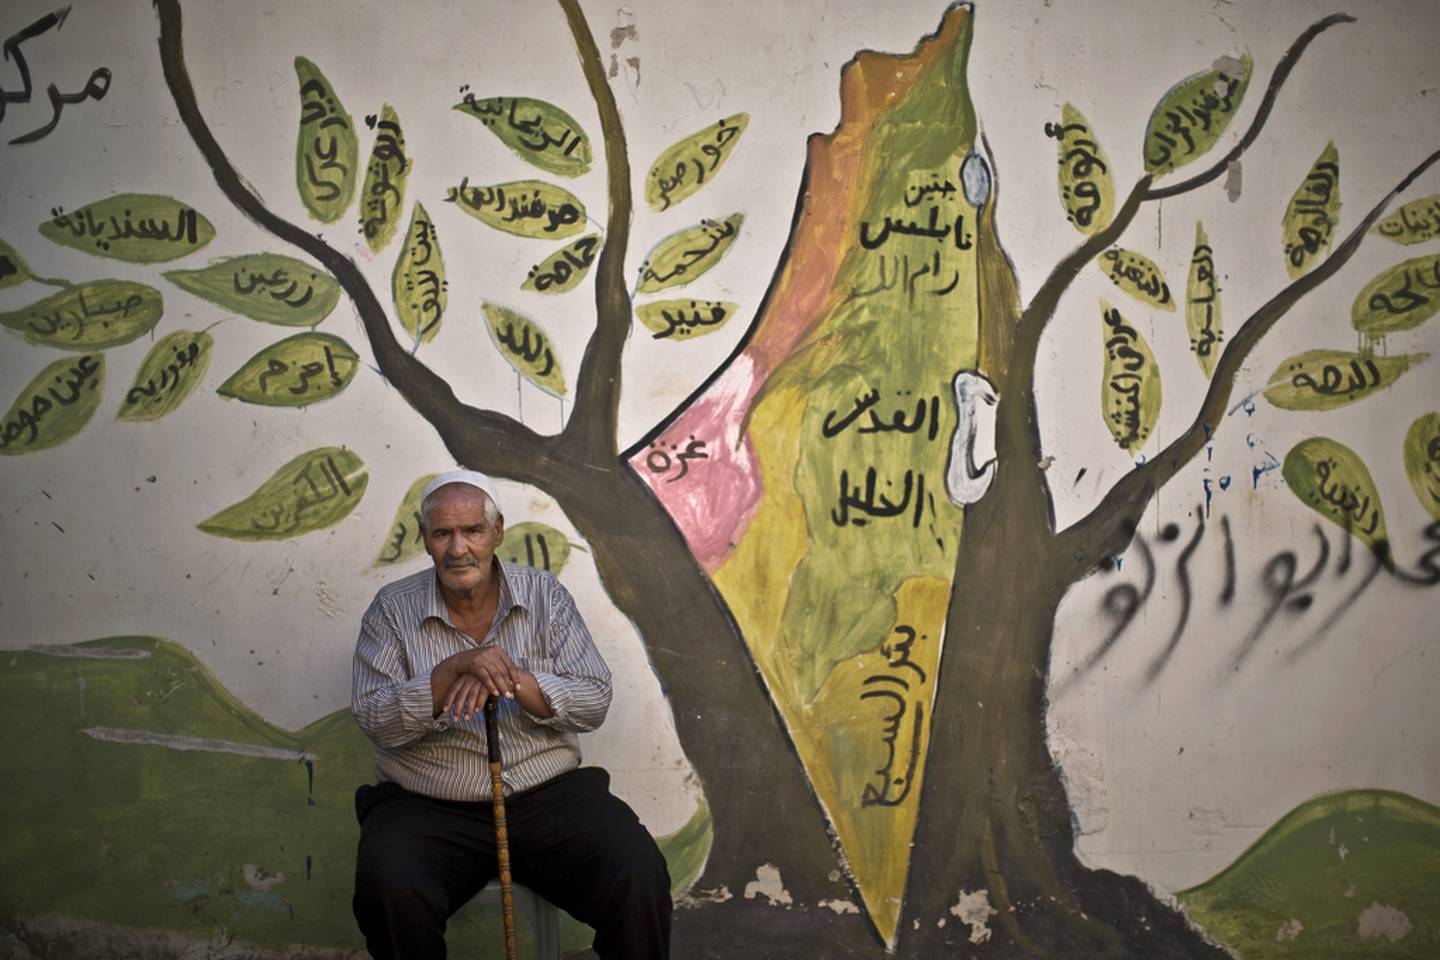 Palestinian refugee Ali Abu Jabal, 73, in the West Bank refugee camp of Jenin. Mr Jabal was seven years old when his family was forced to leave their home in Haifa during the 'Nakba' in 1948. 